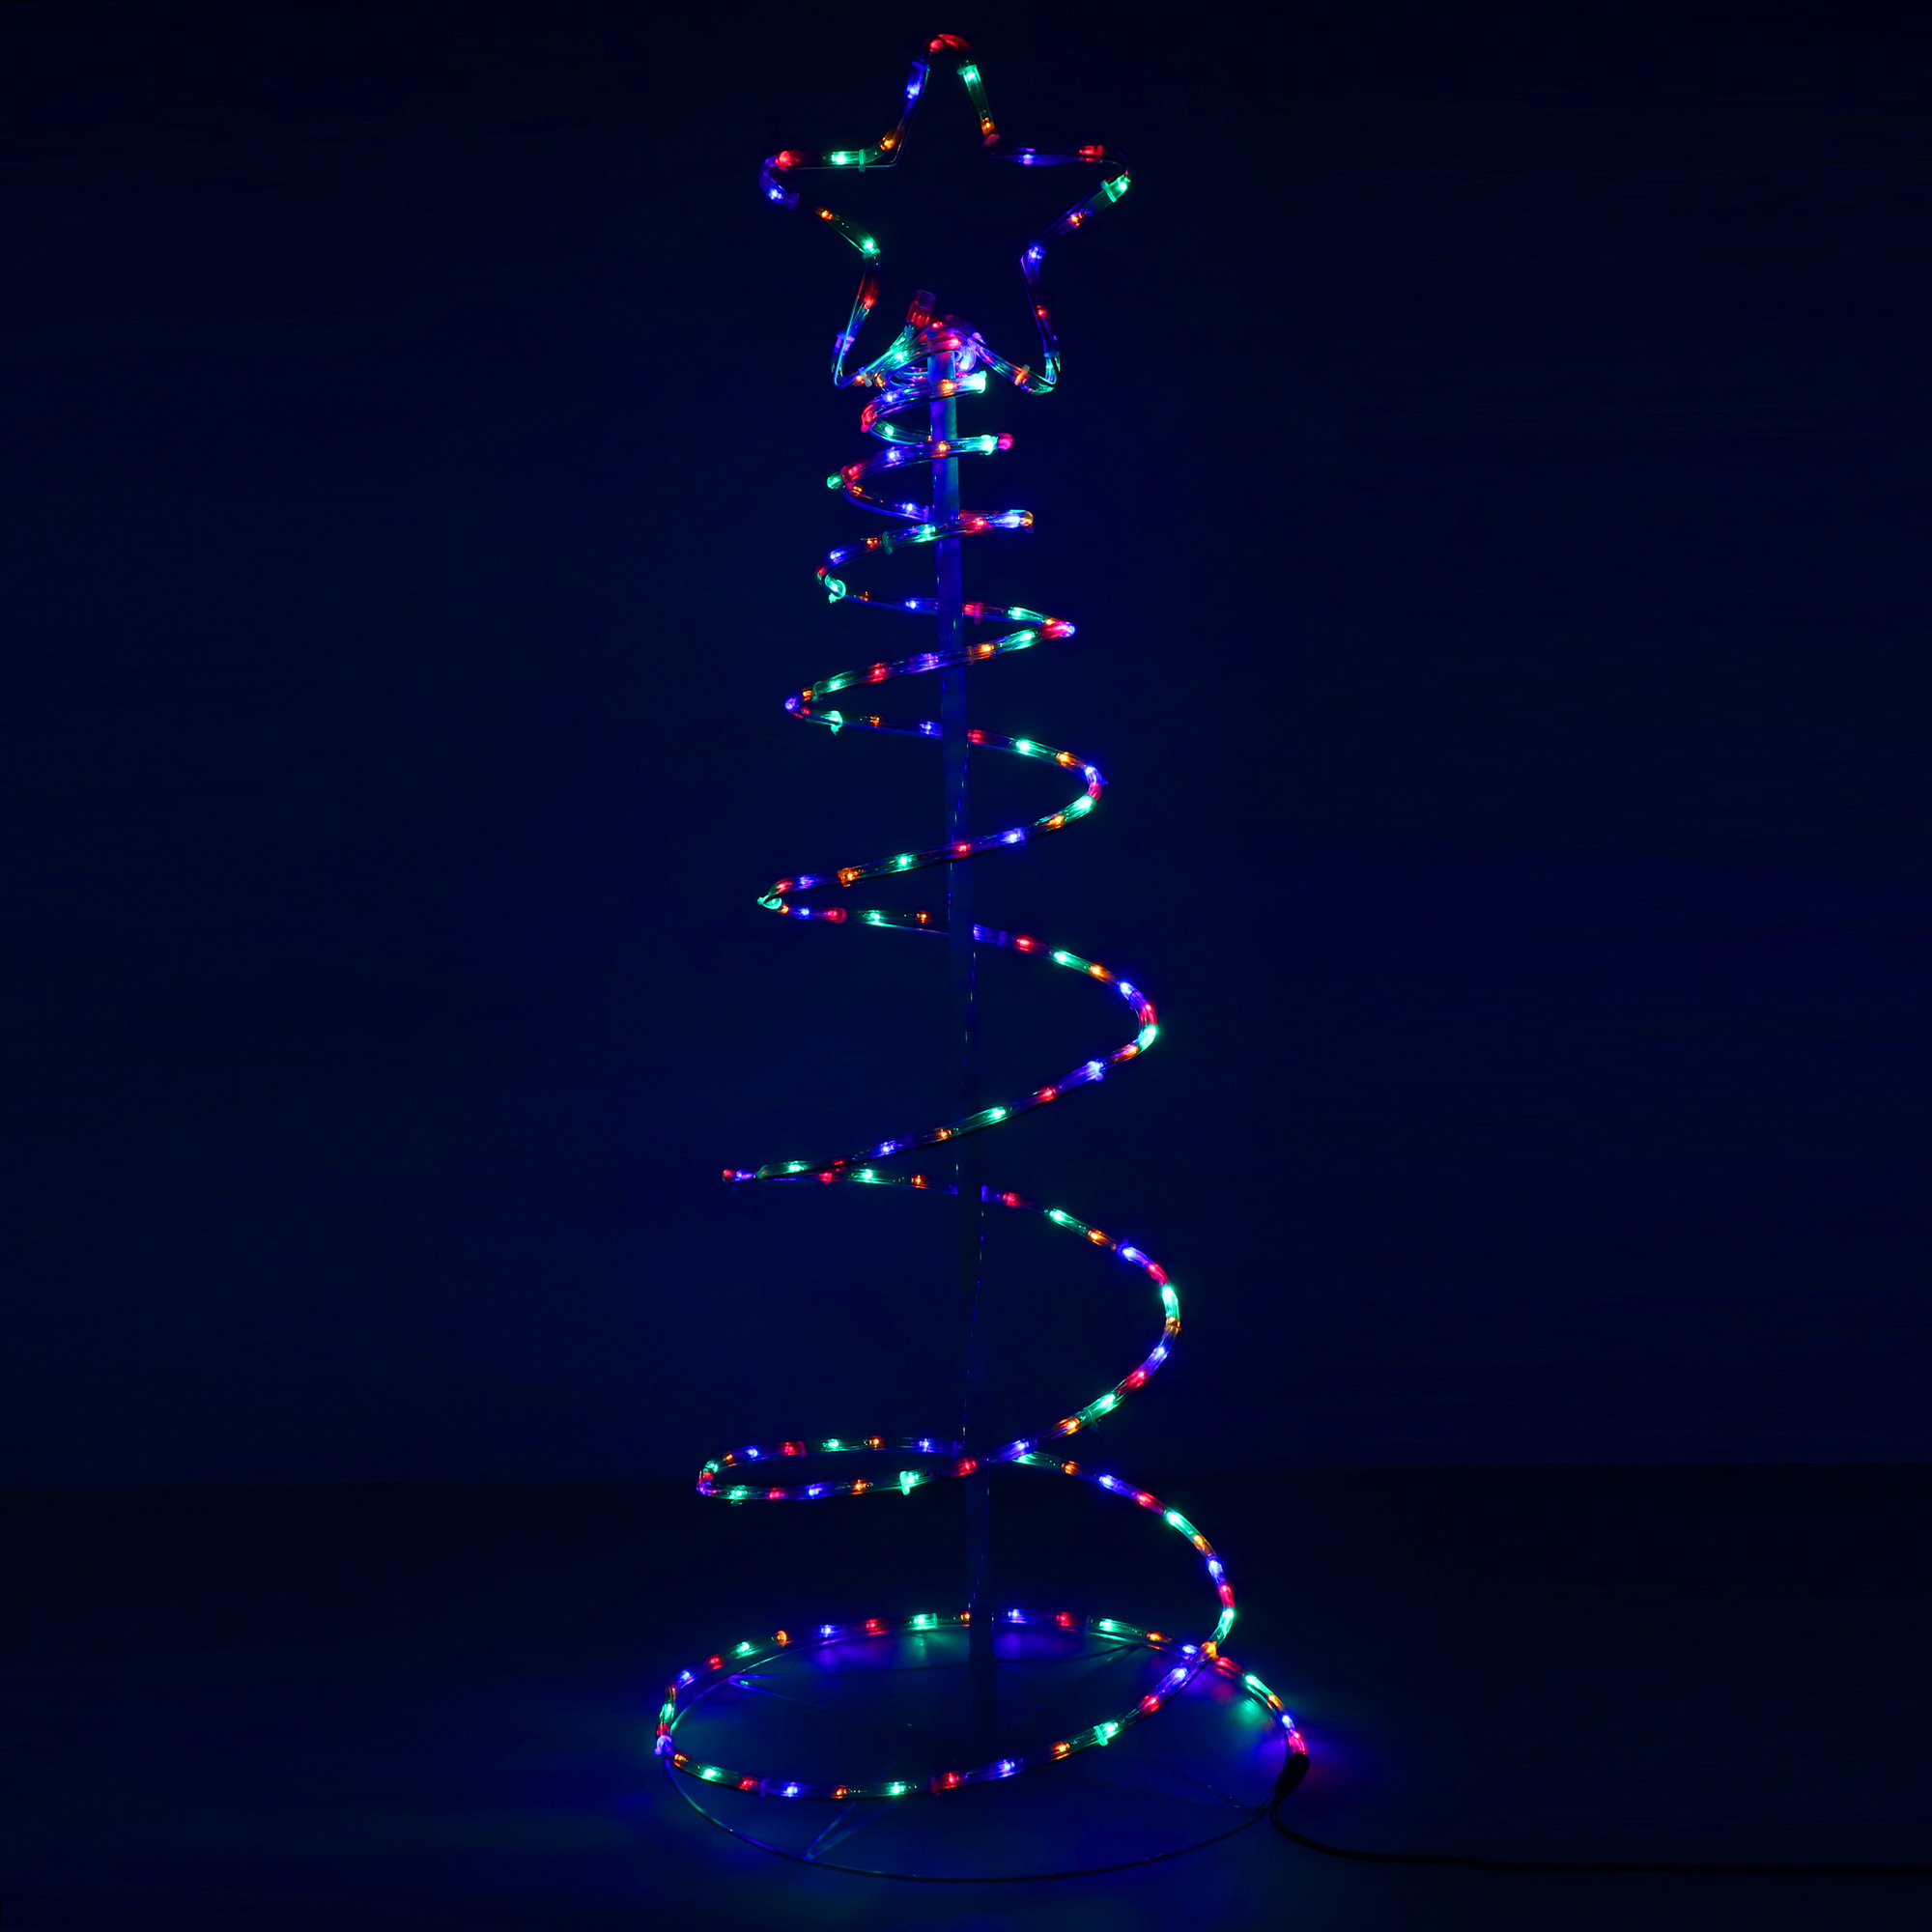 LED Christmas Tree Spiral 192 LEDs with Star Spiral Tree Decorative Metal  Indoor